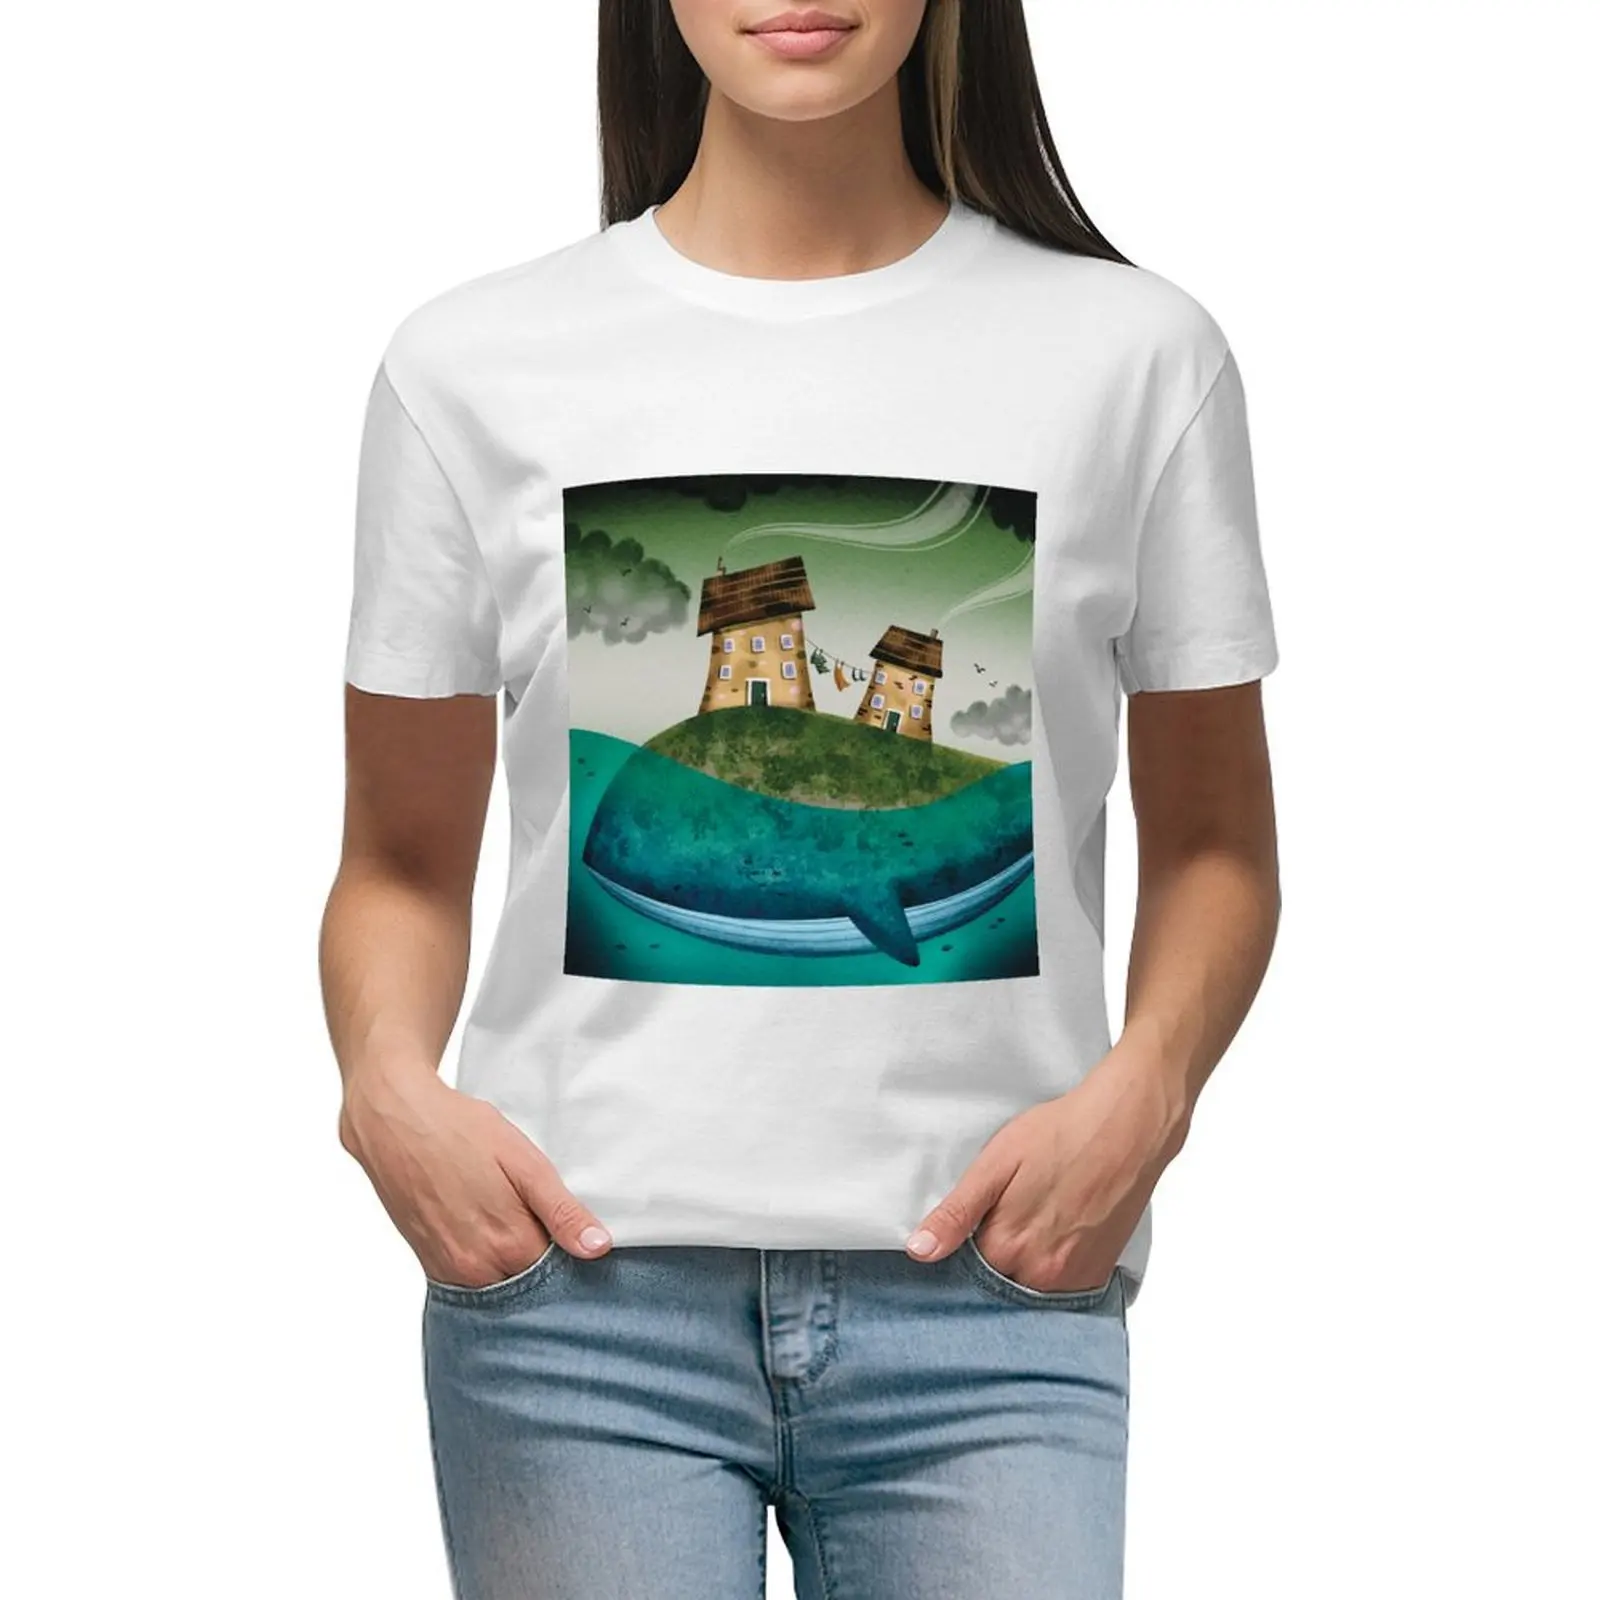 

Whale House T-shirt shirts graphic tees aesthetic clothes hippie clothes designer clothes Women luxury